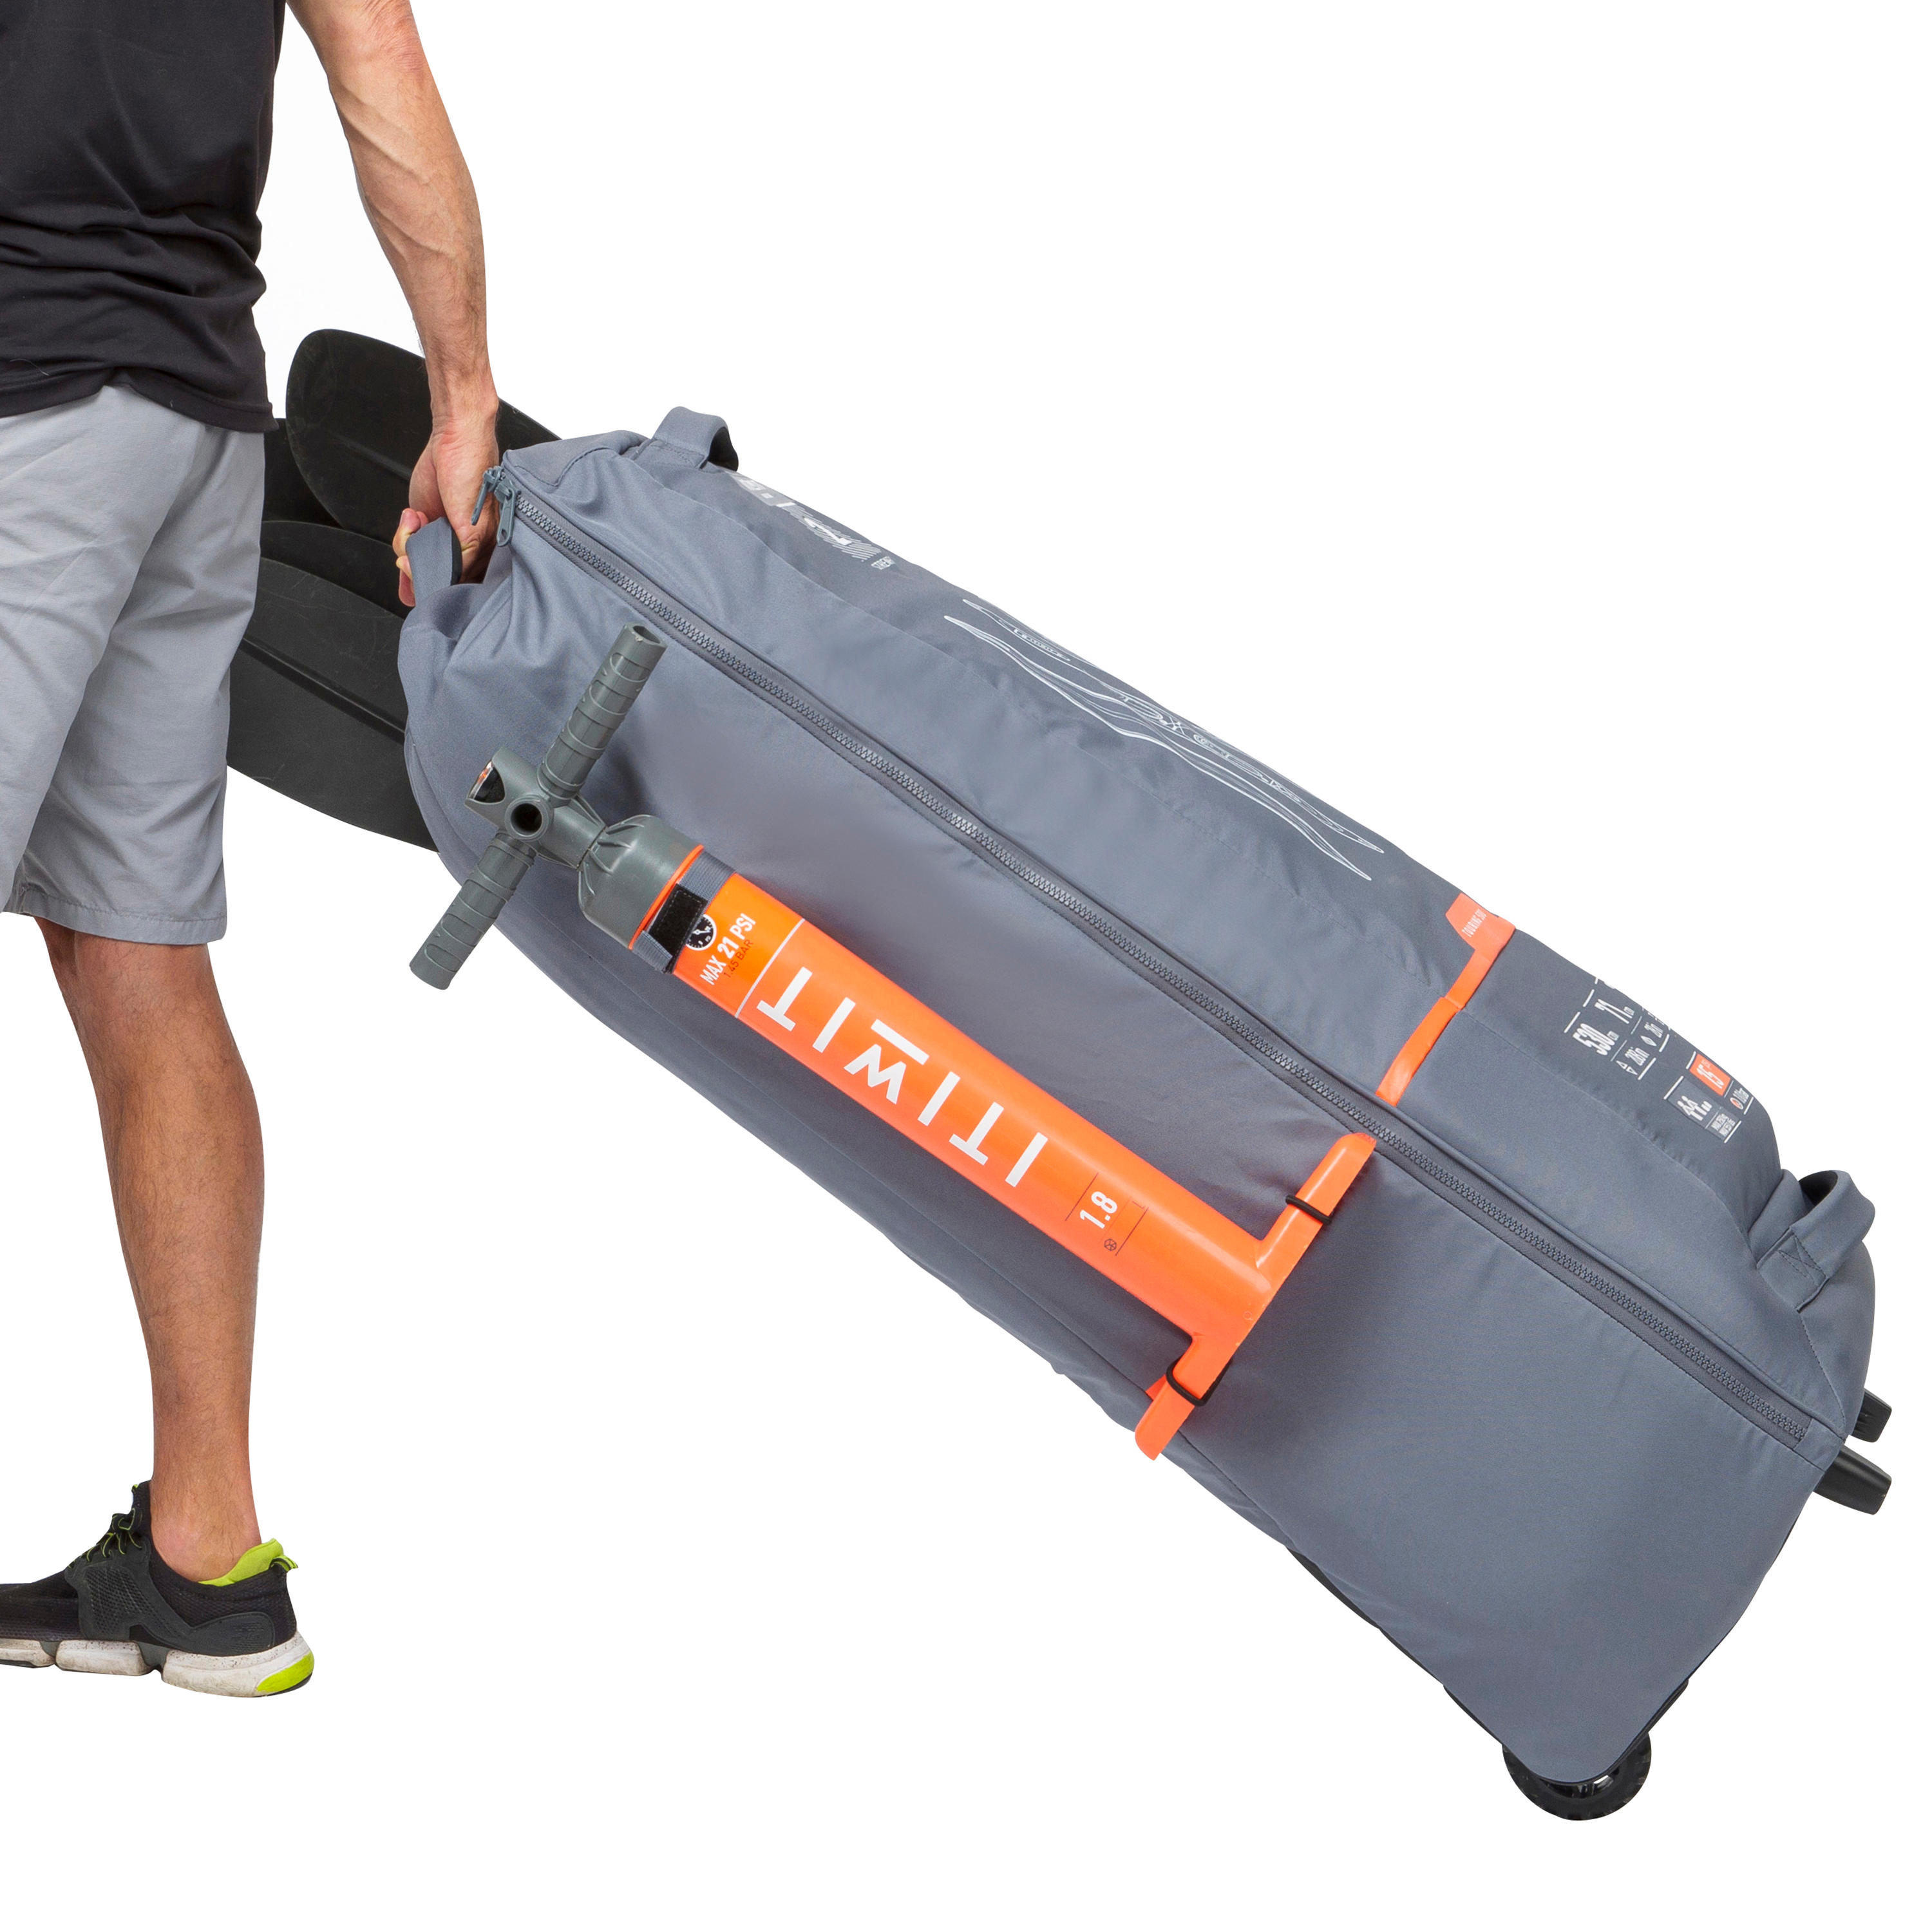 Wheeled carry bag for the x500 2p inflatable kayak 6/9